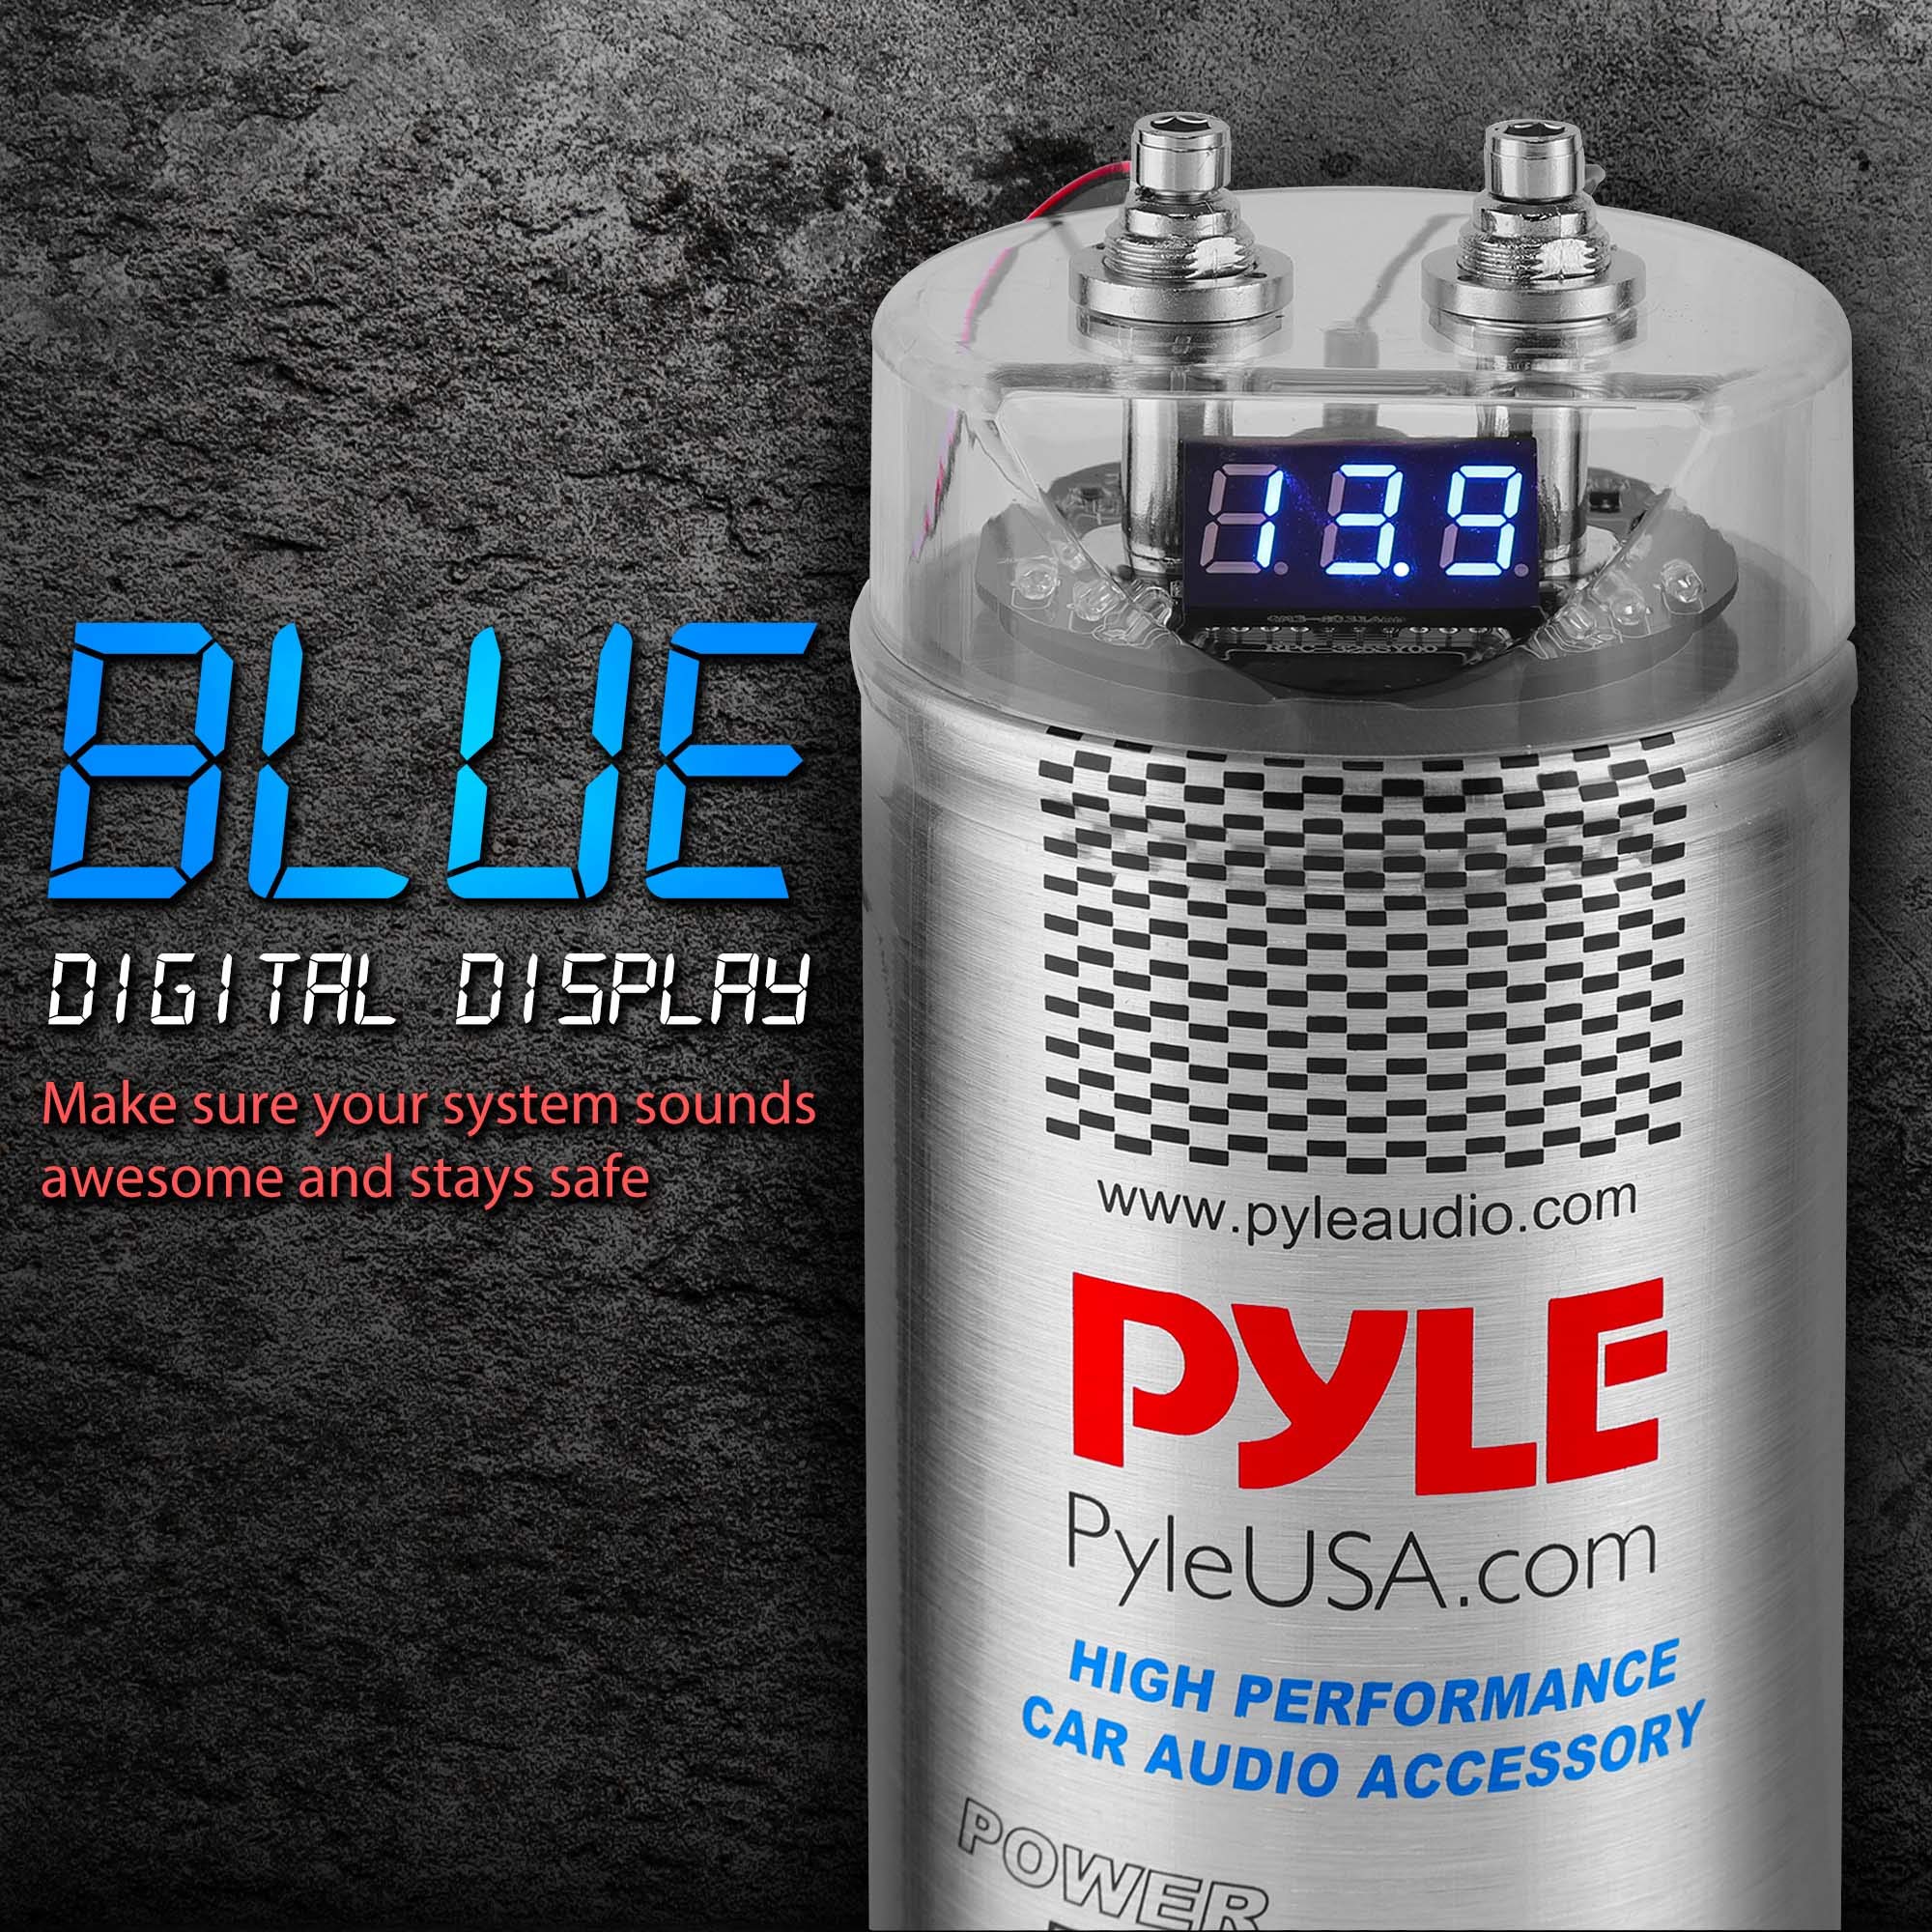 Pyle 5.0 Farad Digital Power Capacitor - High-Performance Car Audio Accessory with Blue Digital Display, Voltage Readout, Over Voltage Protection, Mounting Hardware, DC 12-24V - Pyle PLCAPE50